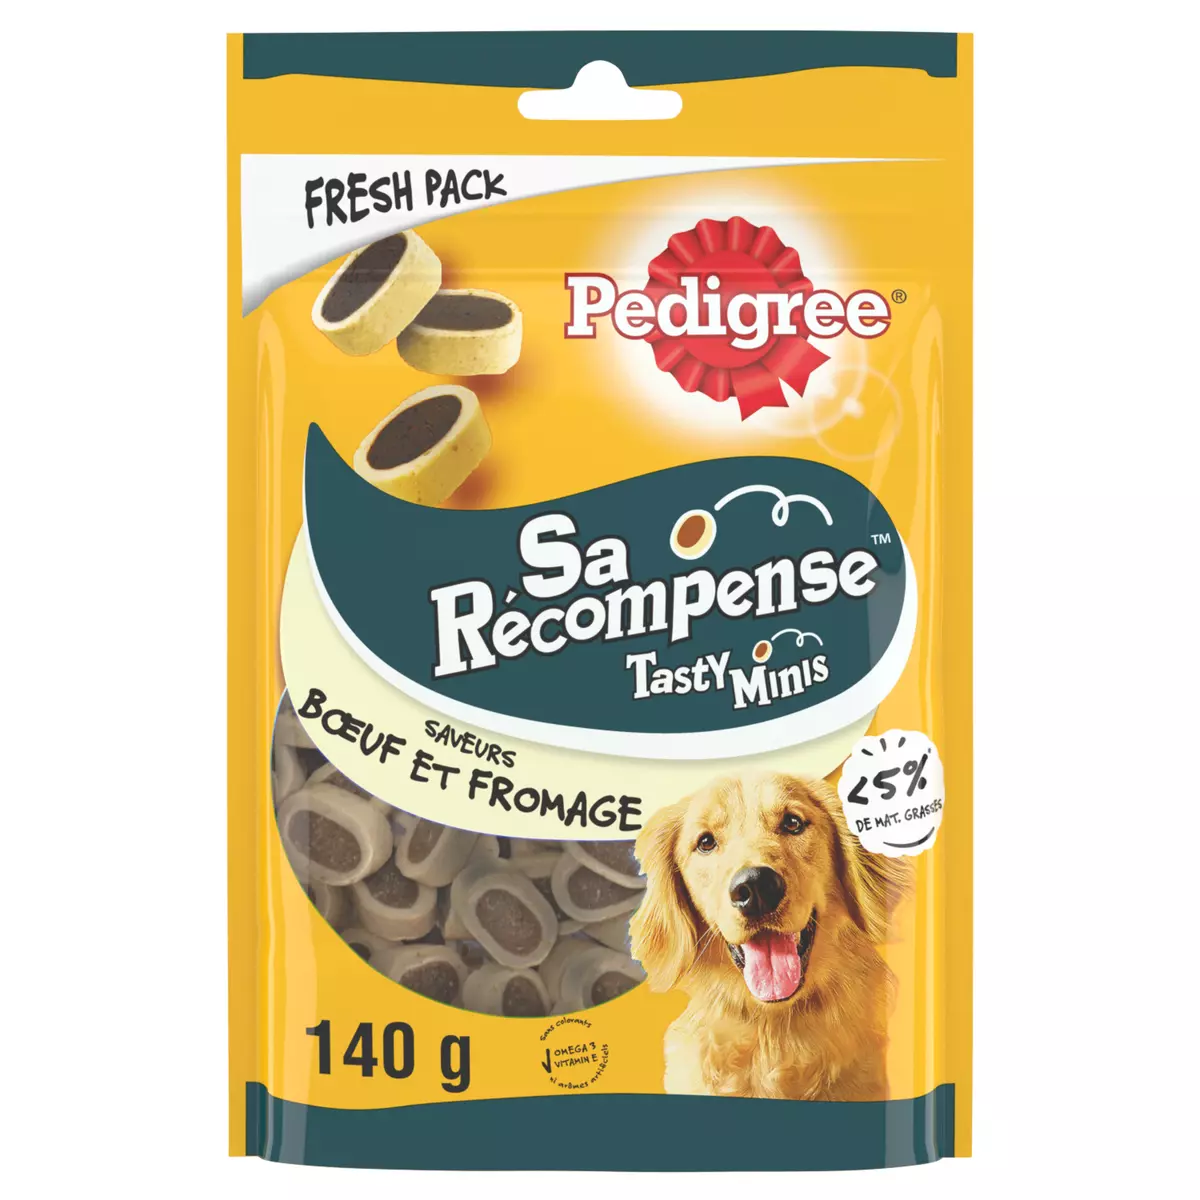 PEDIGREE Friandises tasty minis fromage et boeuf pour chien 140g